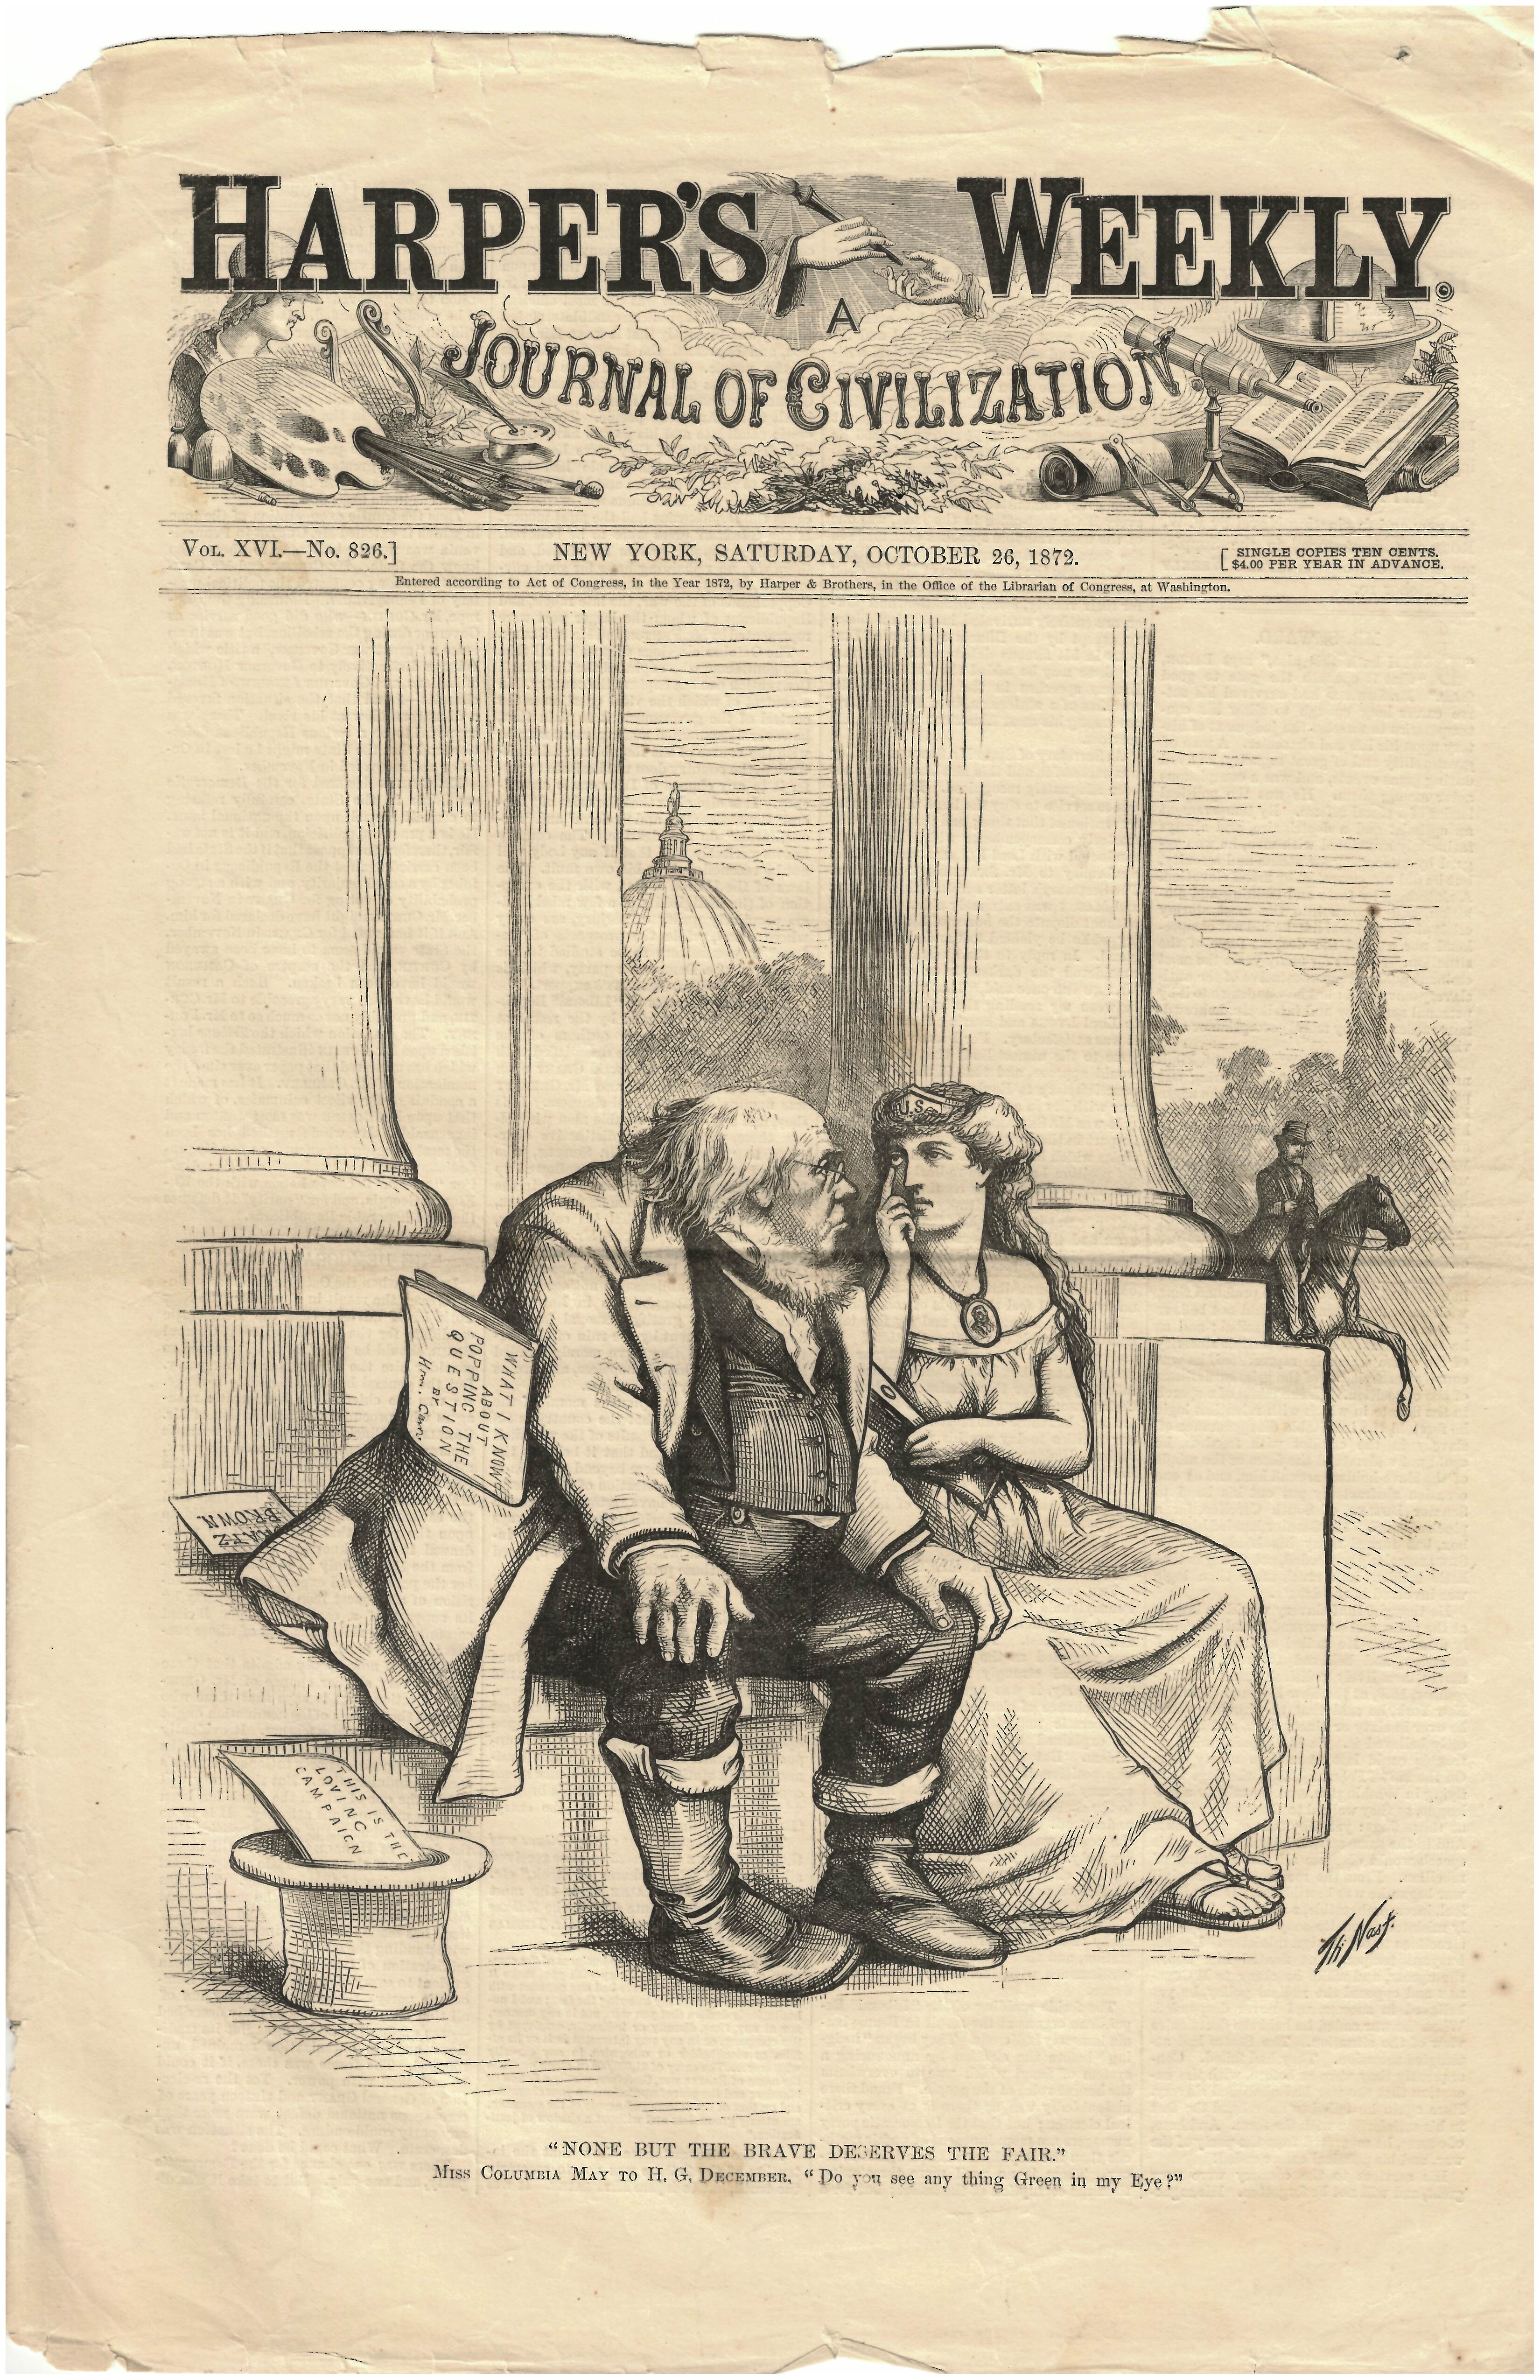 Harper's Weekly October 26, 1872 "None But The Brave Deserves The Fair" Cover Page Ad Print